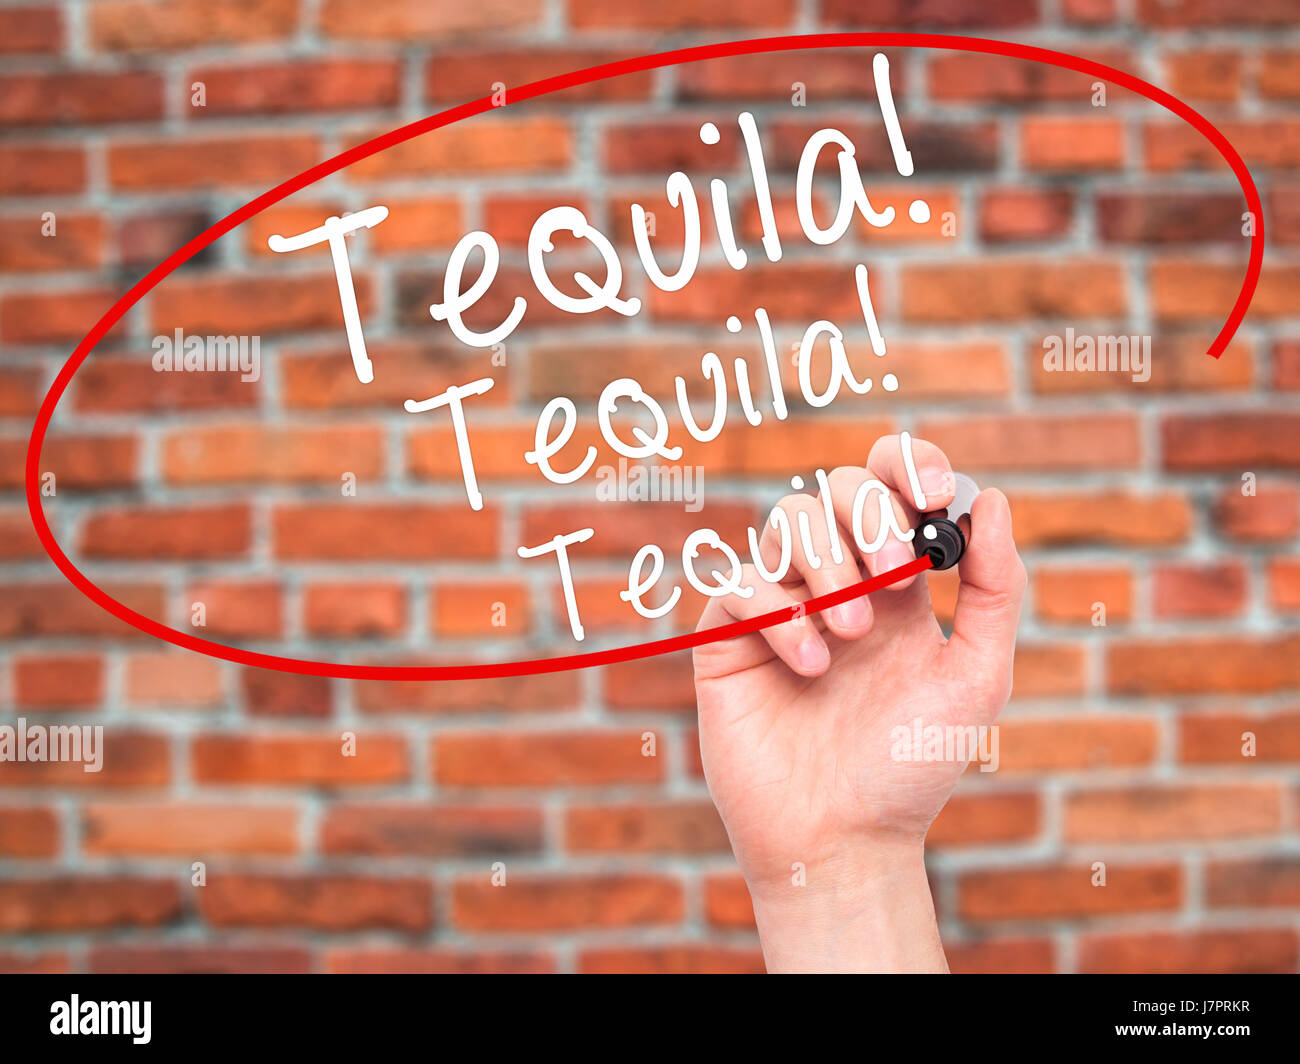 Man Hand writing Tequila with black marker on visual screen. Isolated on bricks. Business, technology, internet concept. Stock Photo Stock Photo